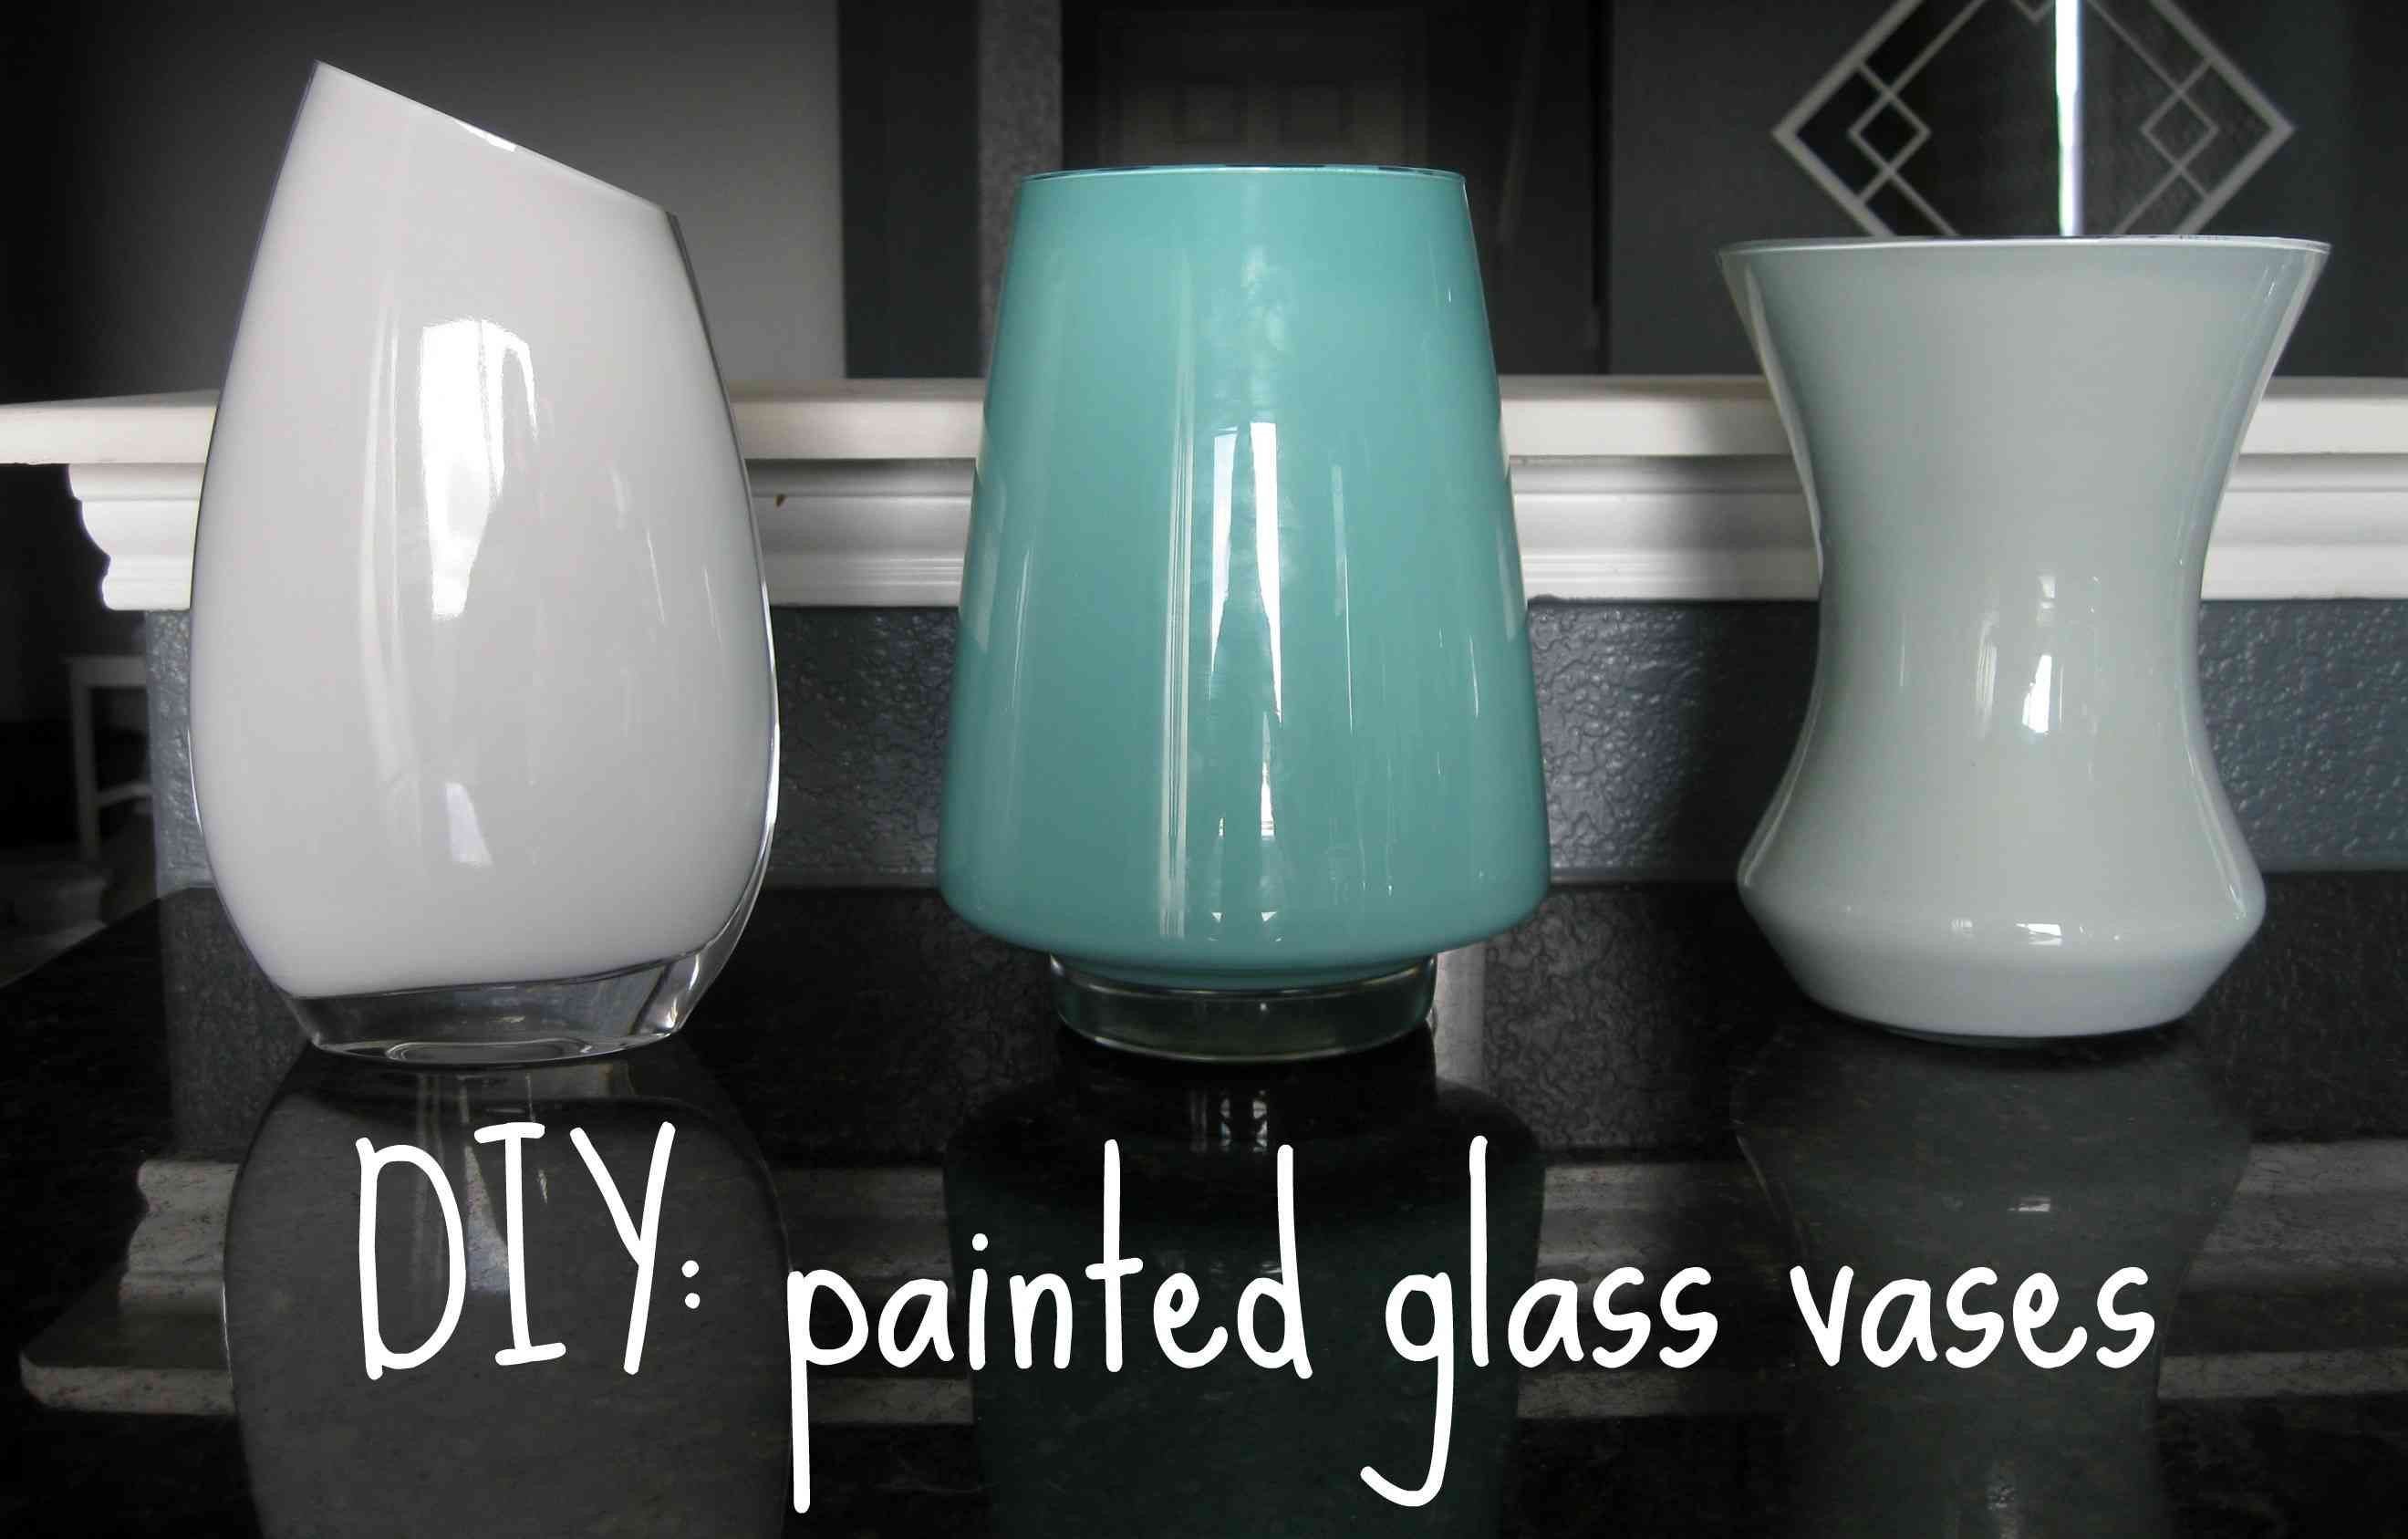 colored glass cylinder vases of 23 blue crystal vase the weekly world with regard to diy painted glass vasesh vases how to paint vasesi 0d via conejita info